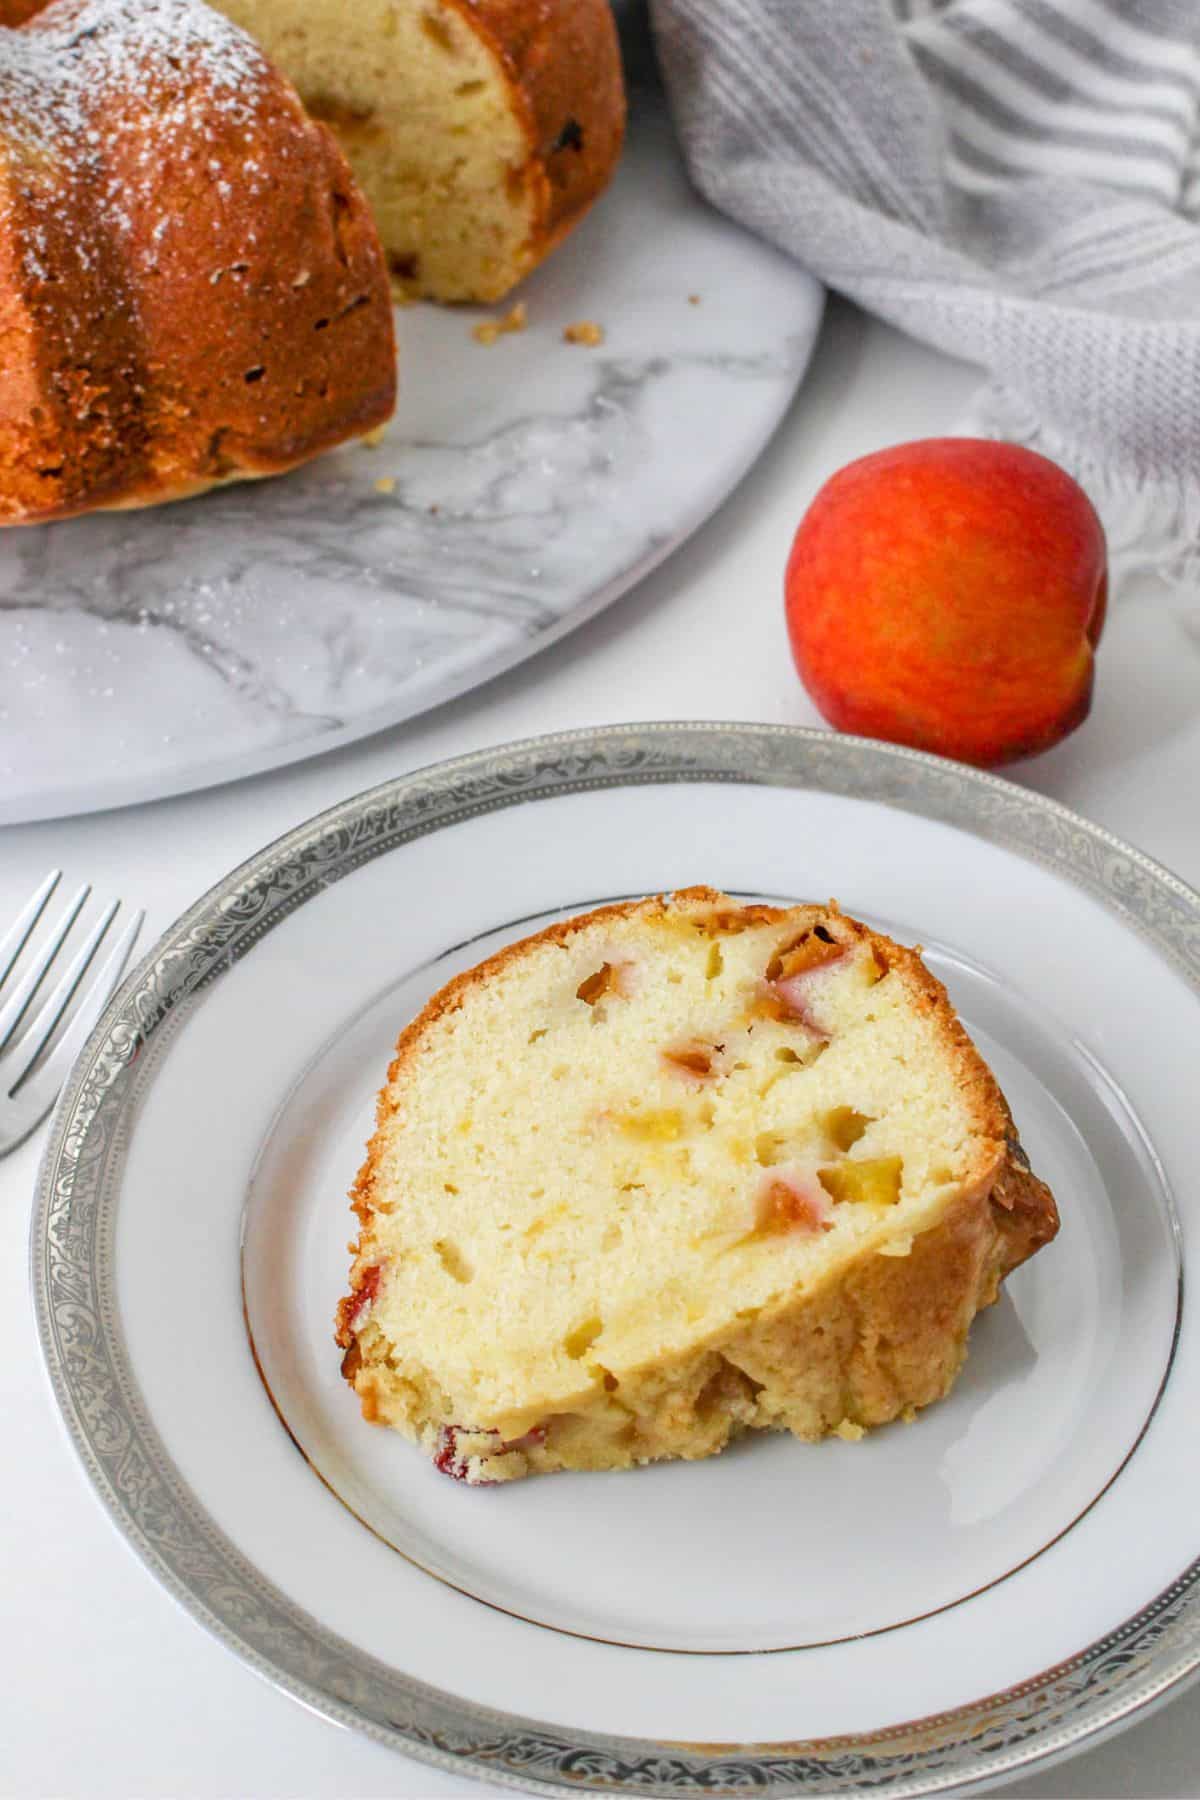 A slice of peach cake on a plate next to a peach and the rest of the cake. 